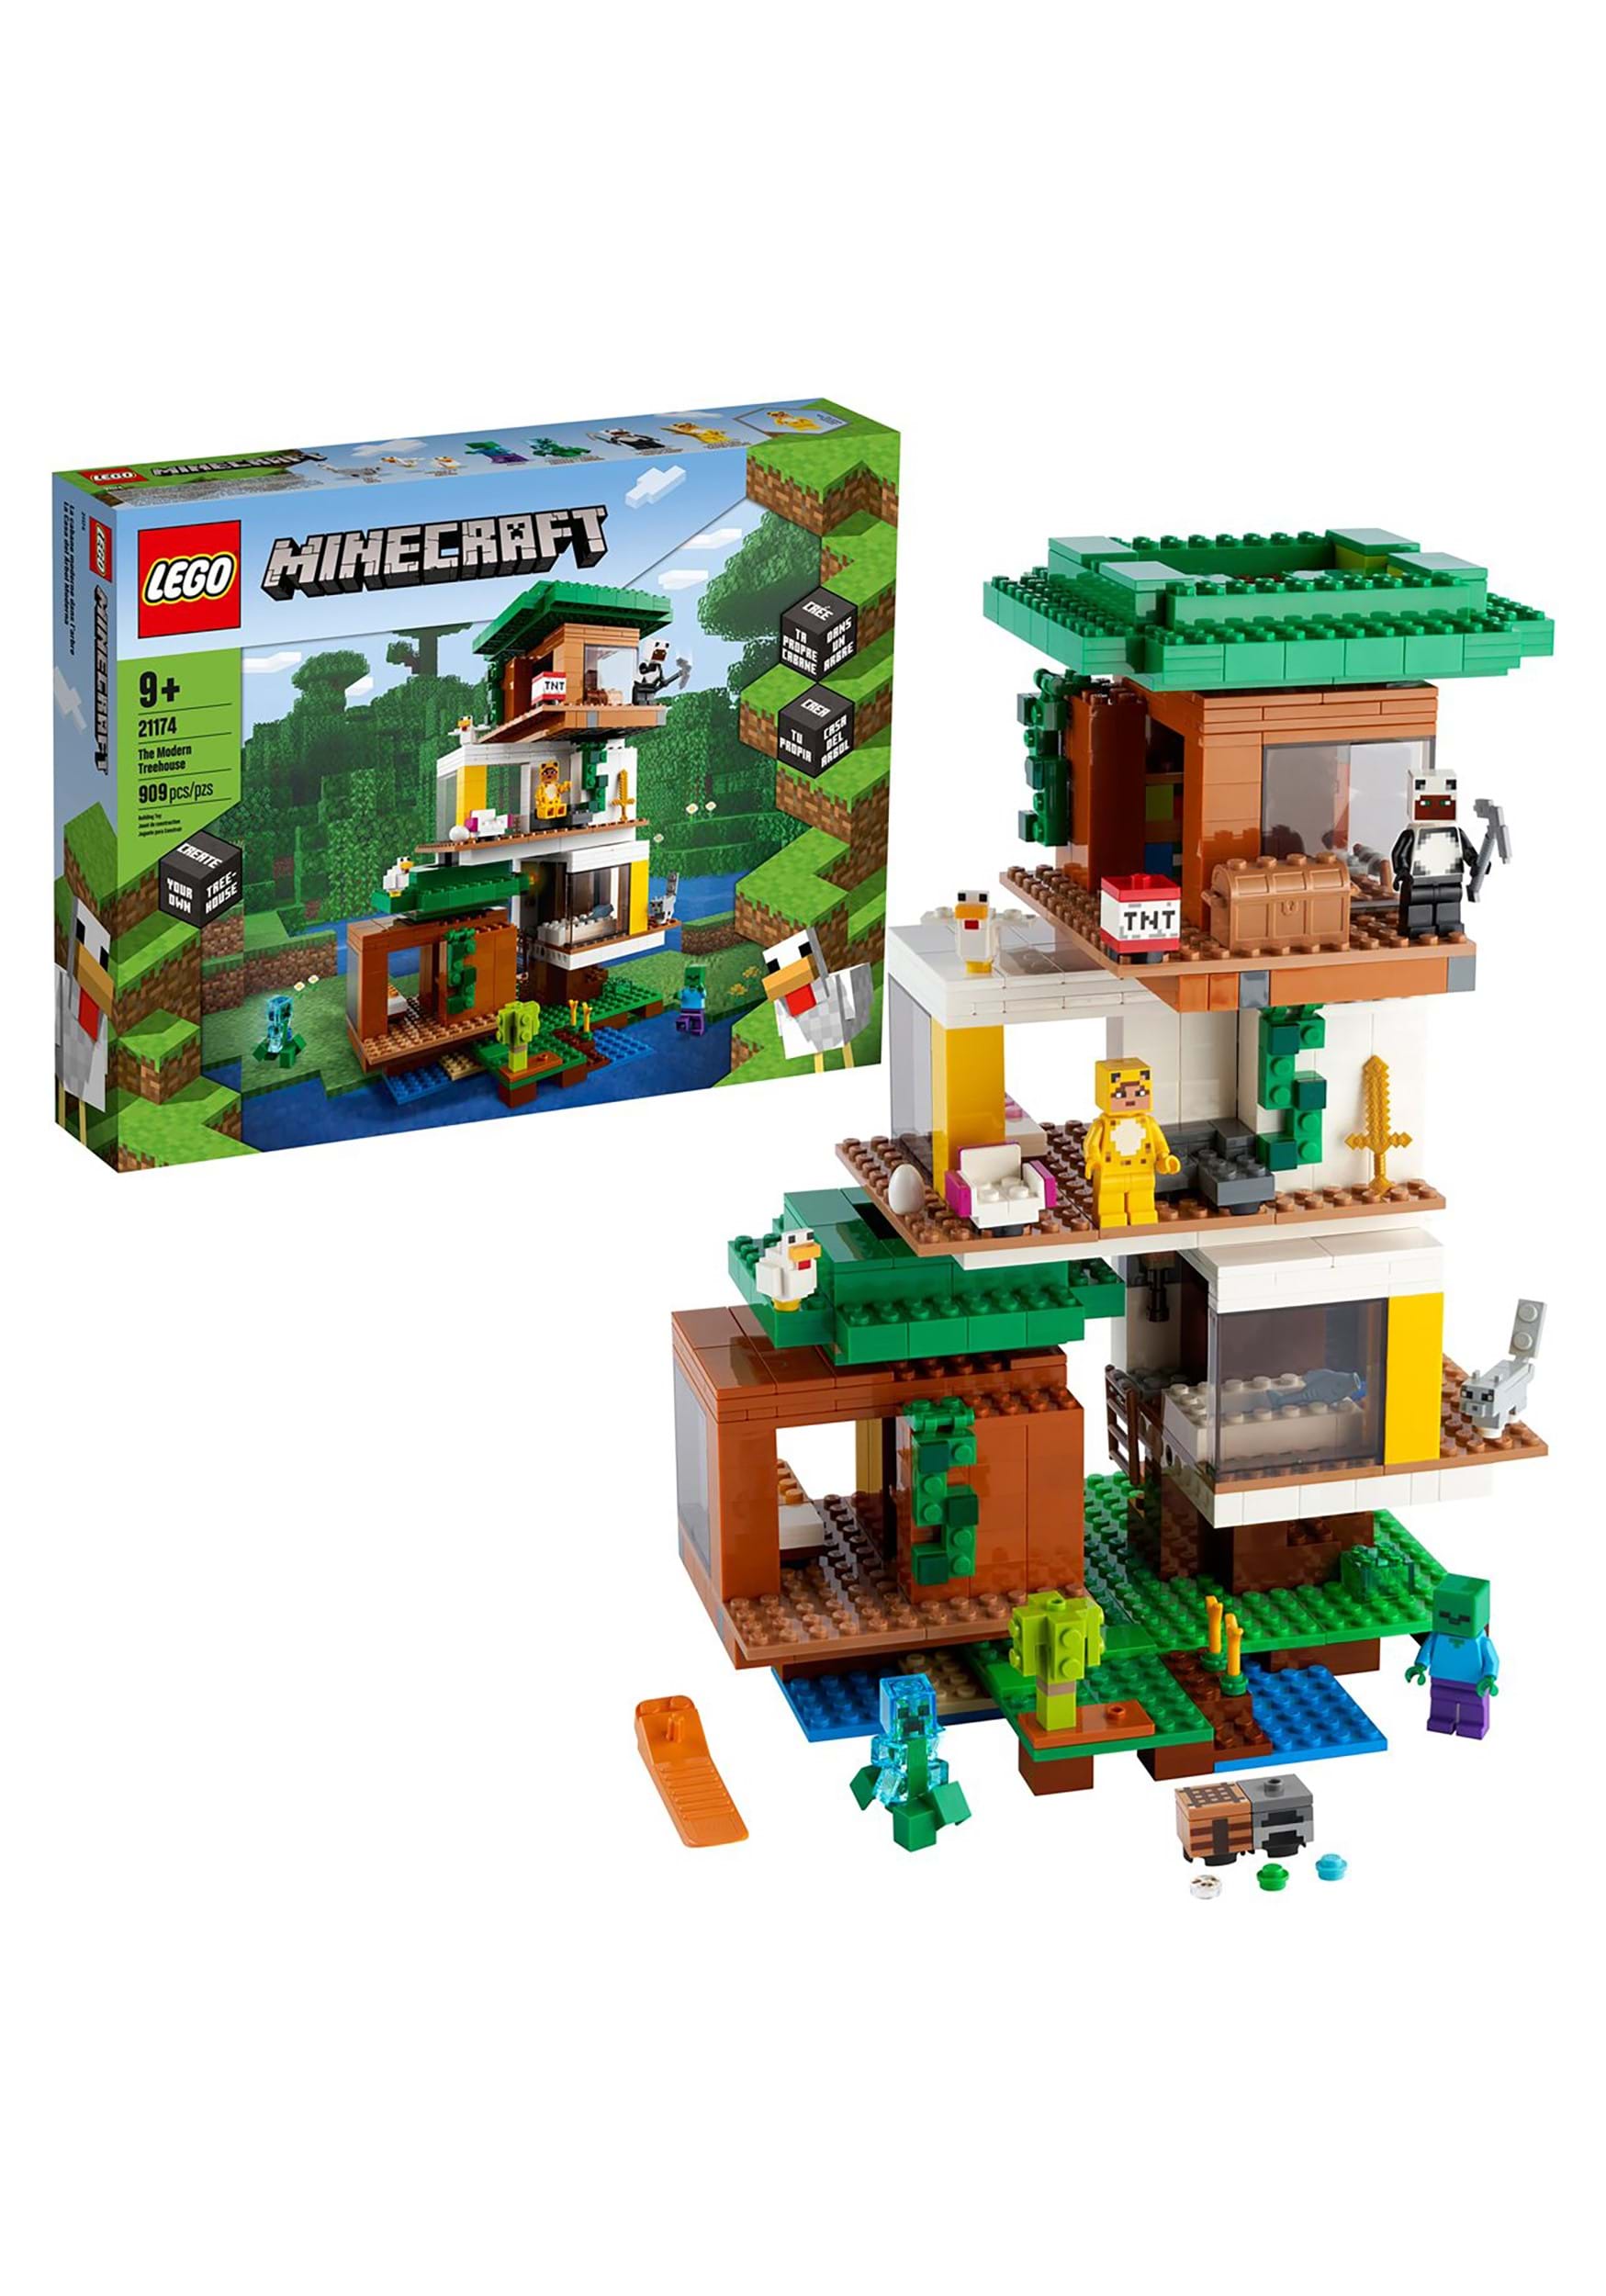 Minecraft The Modern Treehouse from LEGO